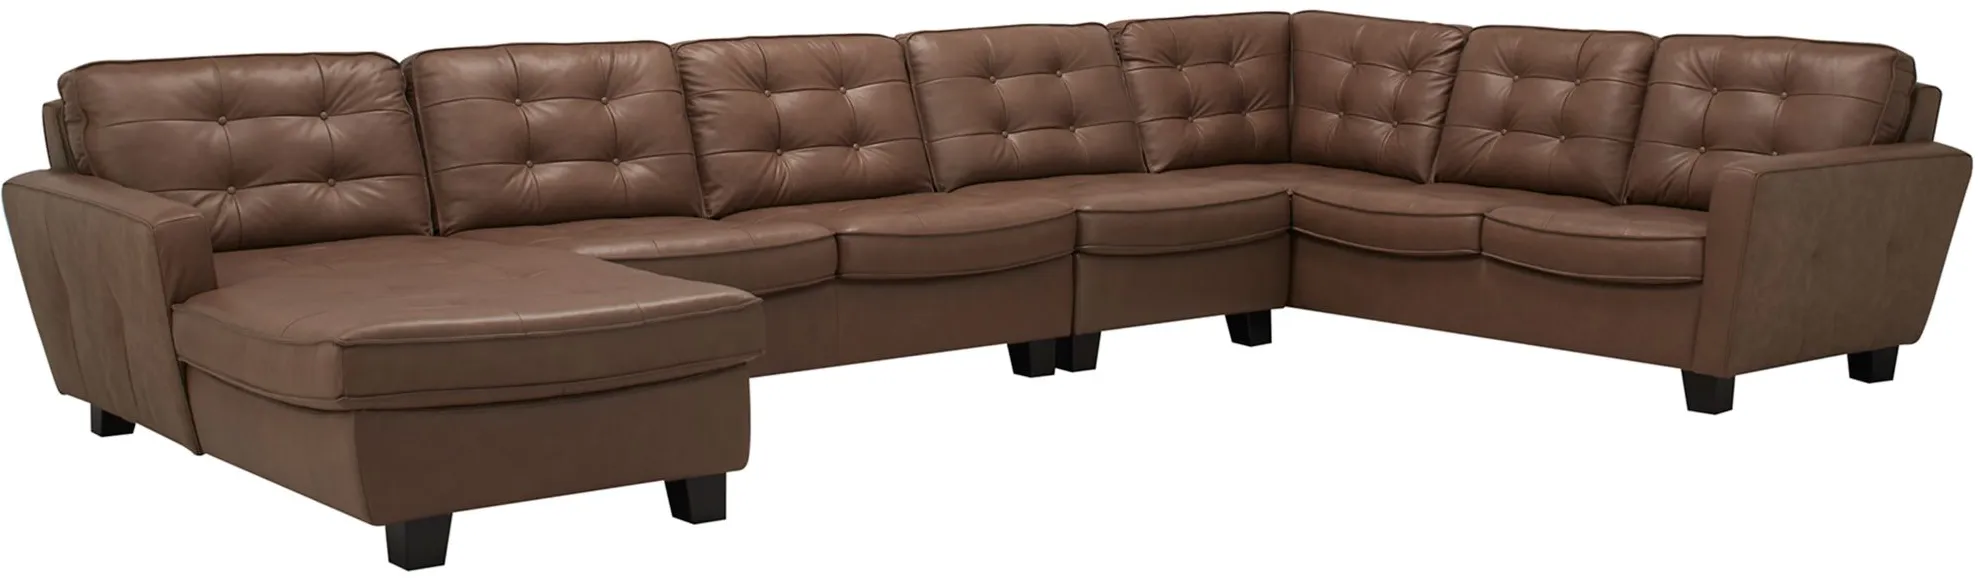 Bryce 4-pc. Sectional in Brown by Chateau D'Ax